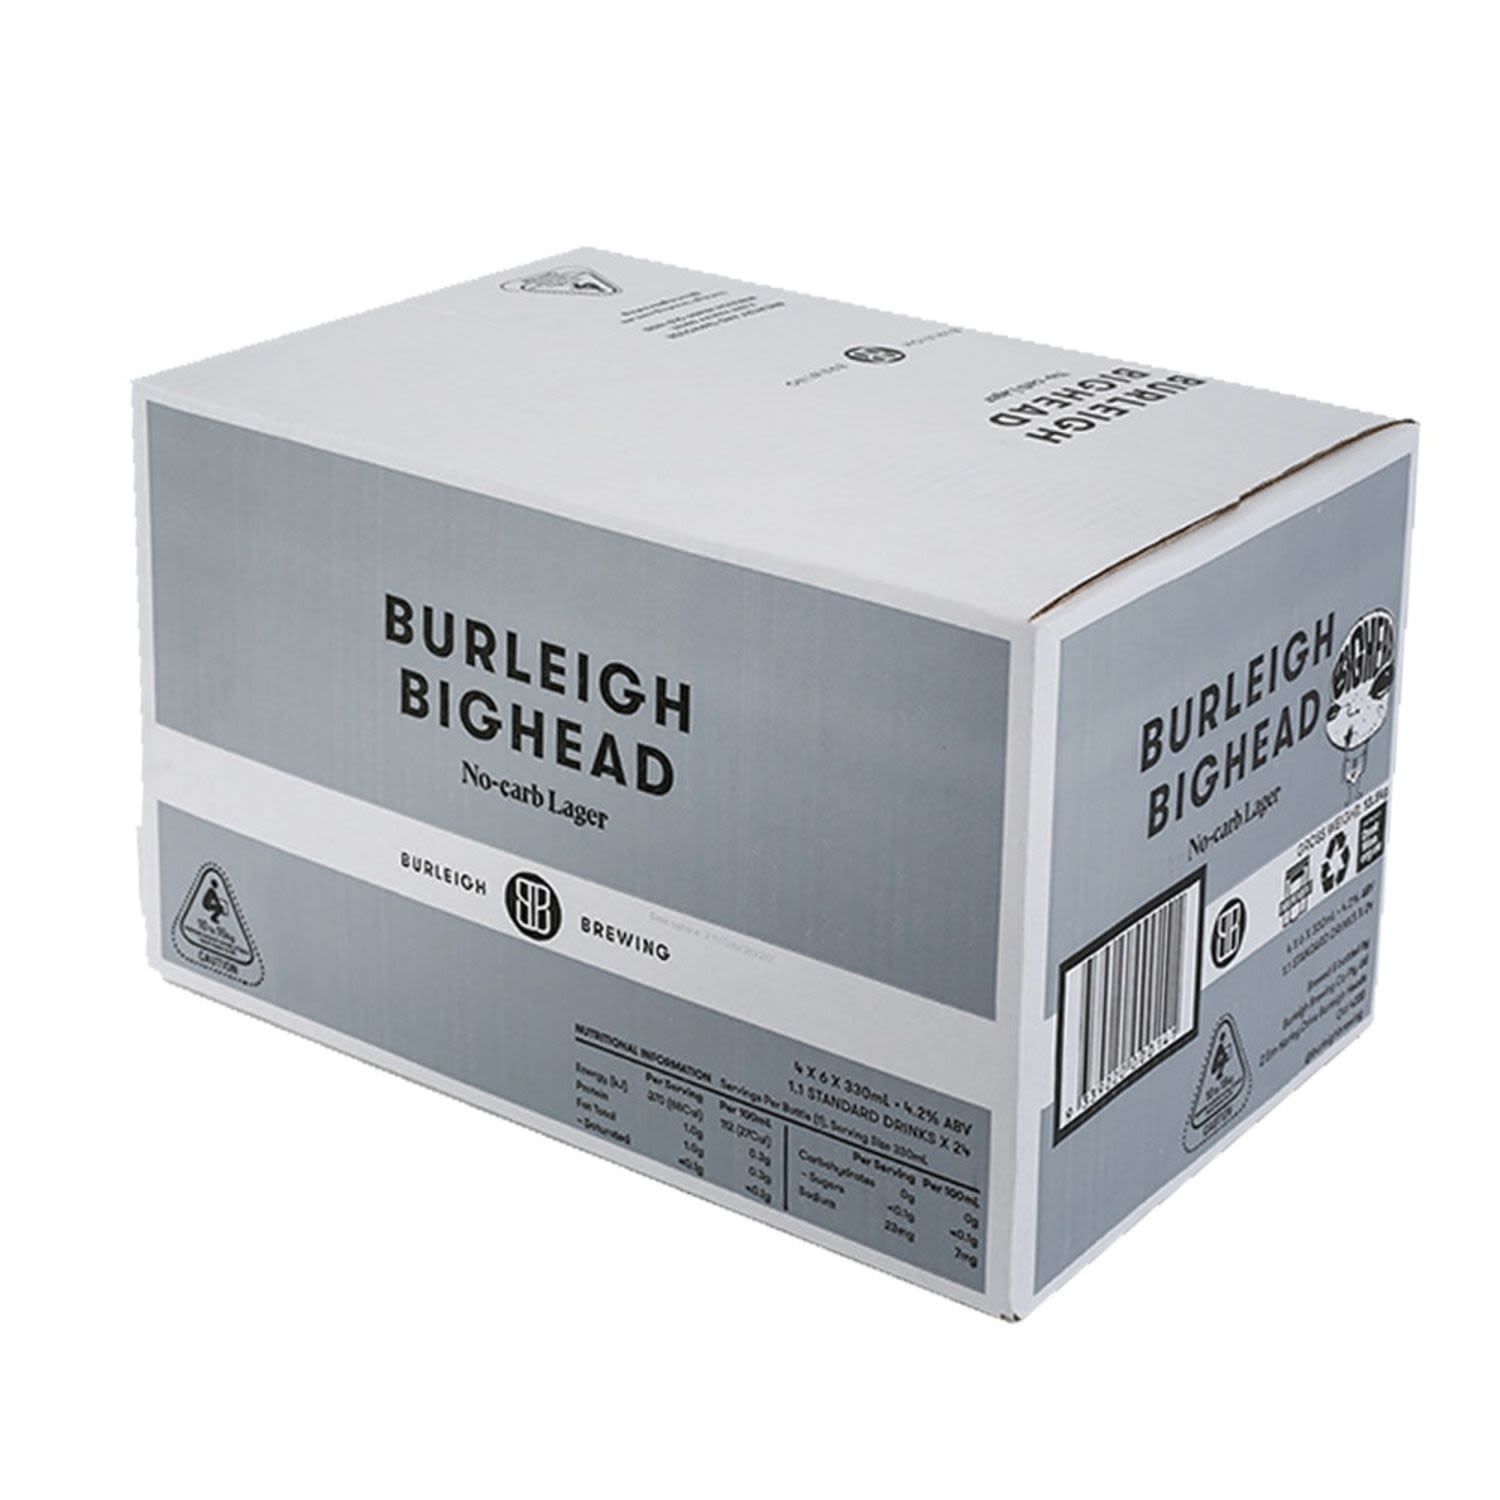 Burleigh Brewing Co. Big Head No Carb Beer 330mL 24 Pack